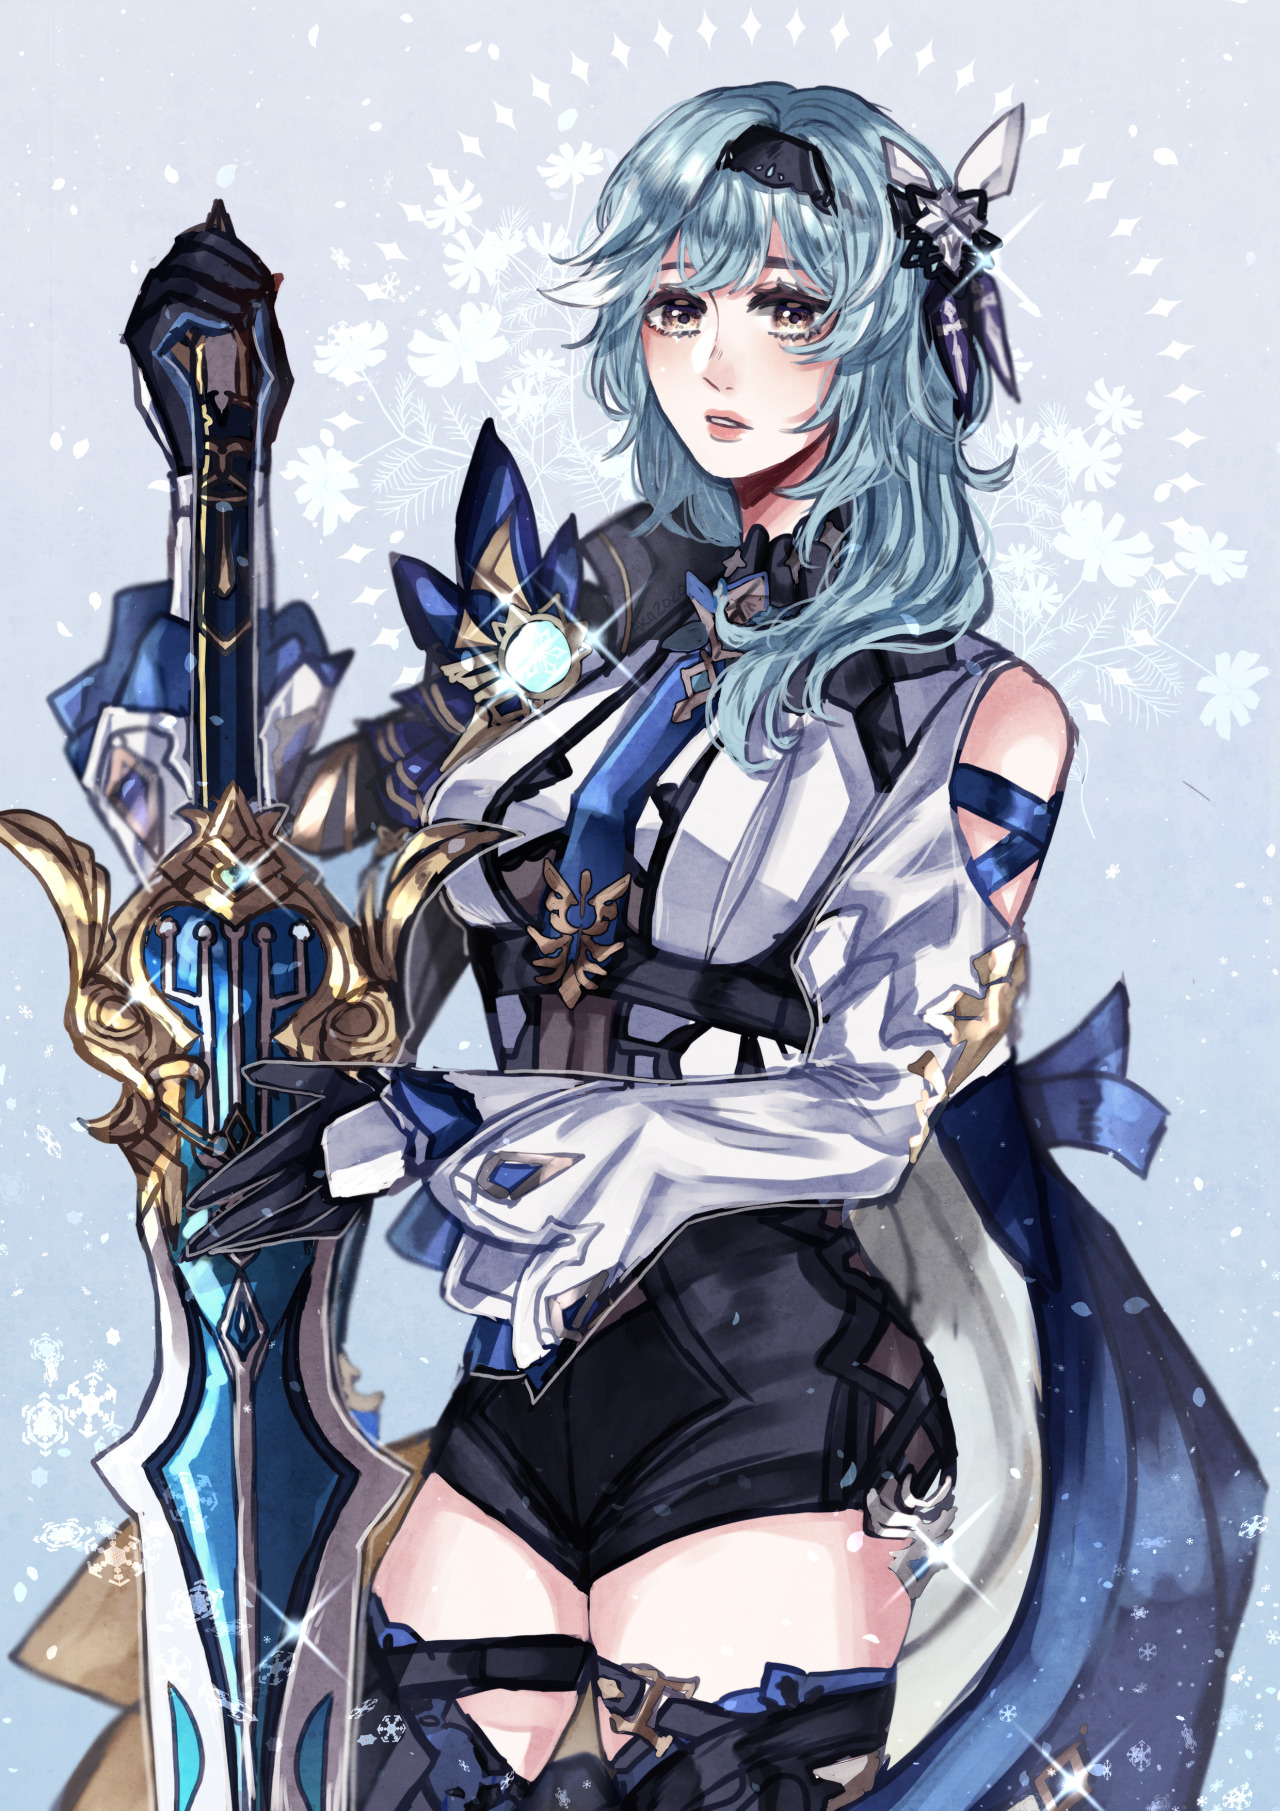 “The Spindrift Knight, Eula ❄️✨
”
Twitter